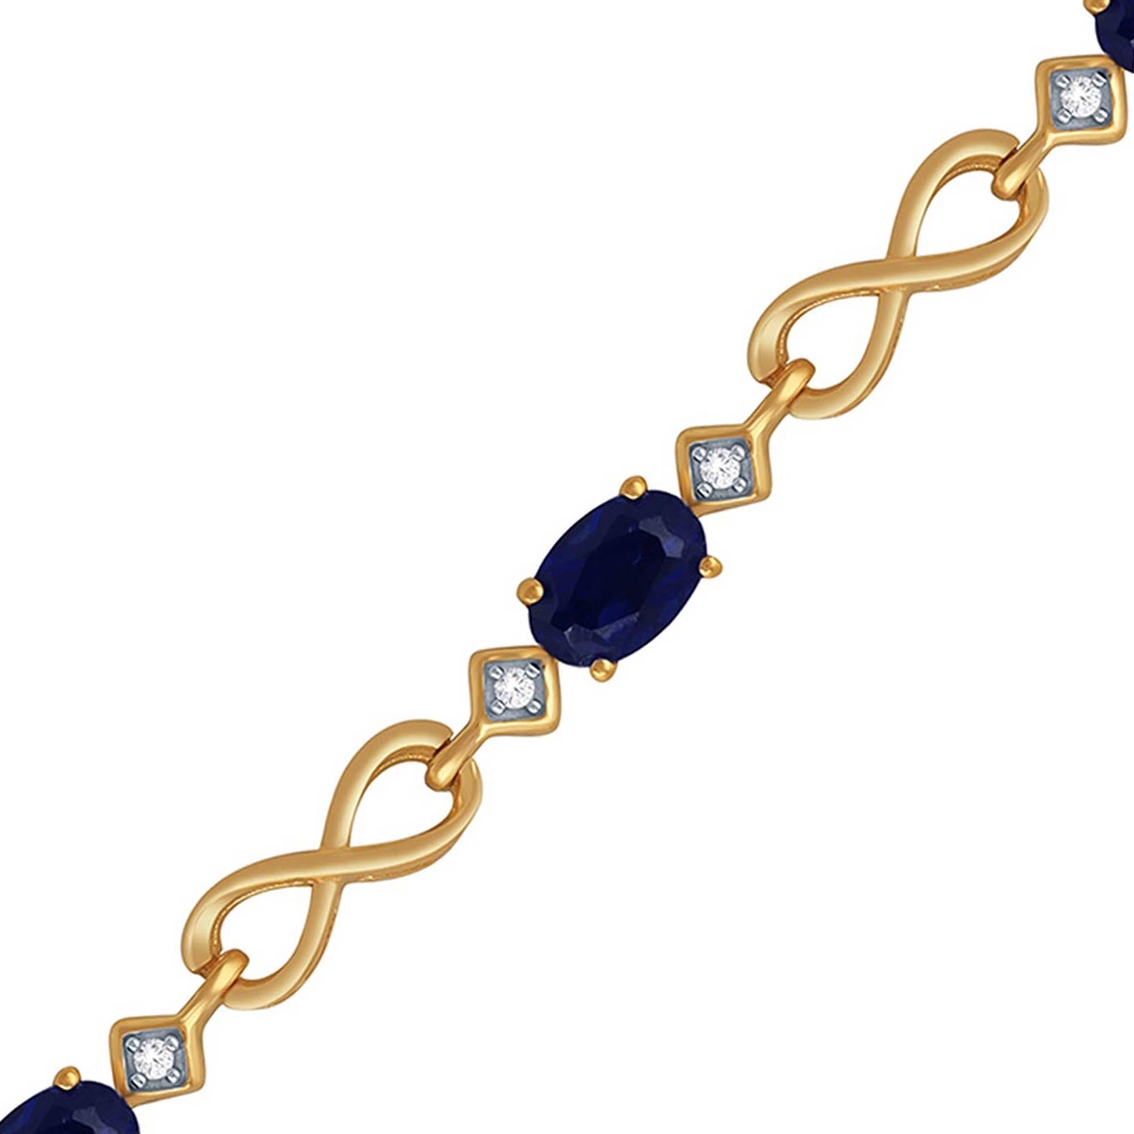 14K Yellow Gold Over Sterling Silver Blue Sapphire and Lab White Sapphire Bracelet - Image 2 of 2